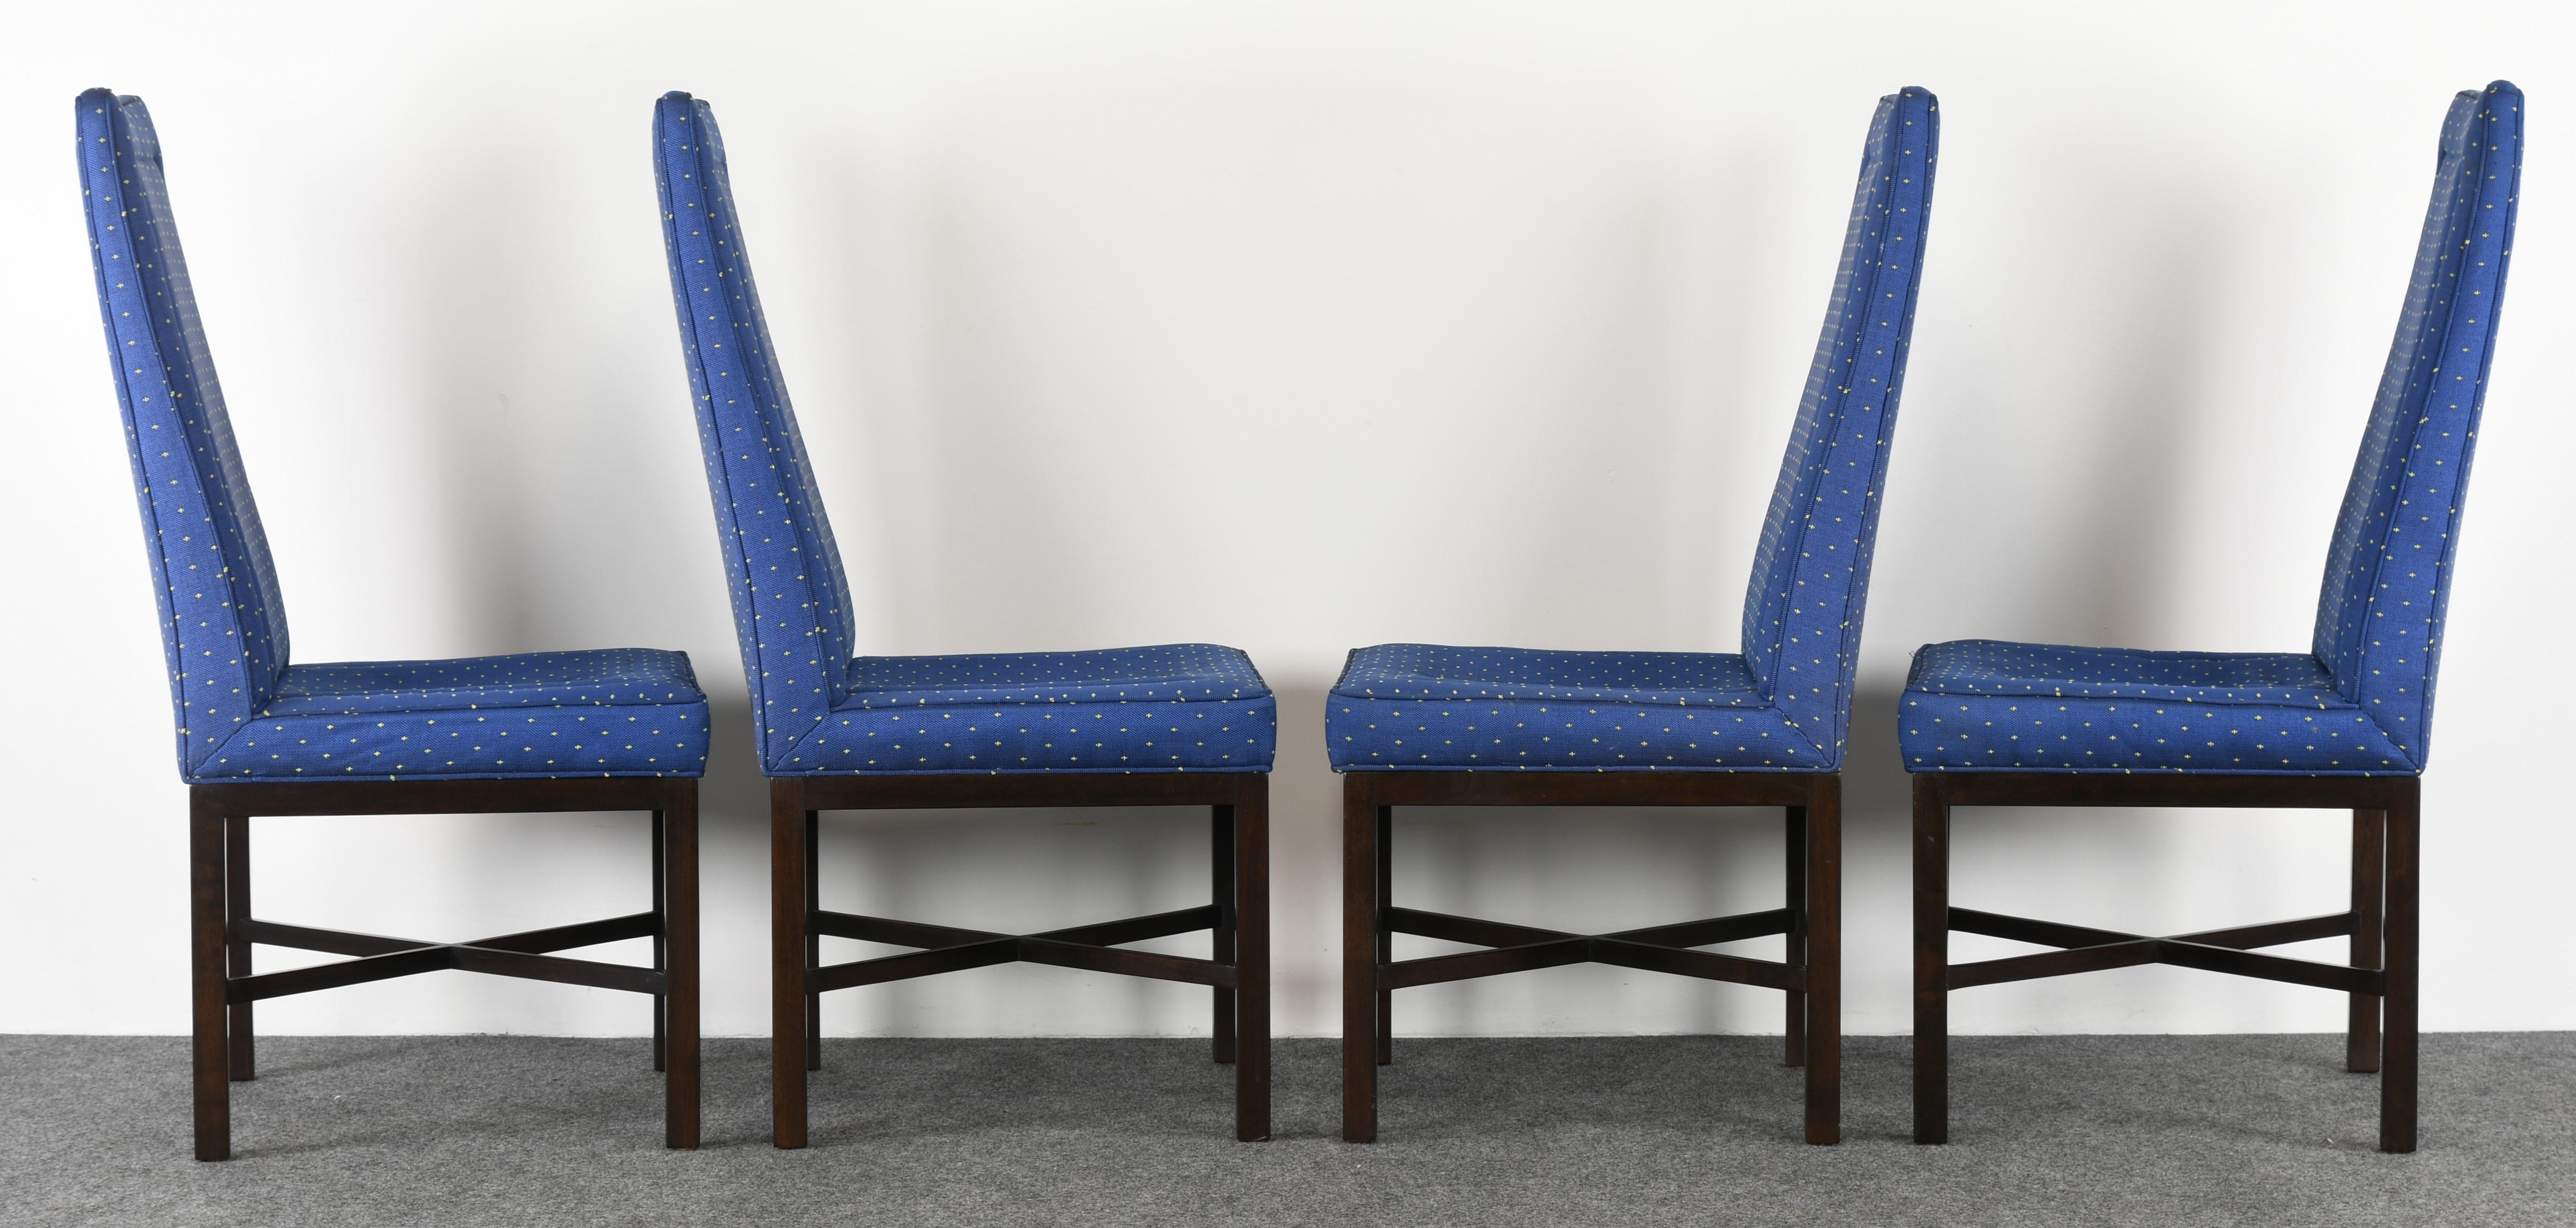 Mid-20th Century Set of Eight Roger Sprunger for Dunbar Dining Chairs, 1960s